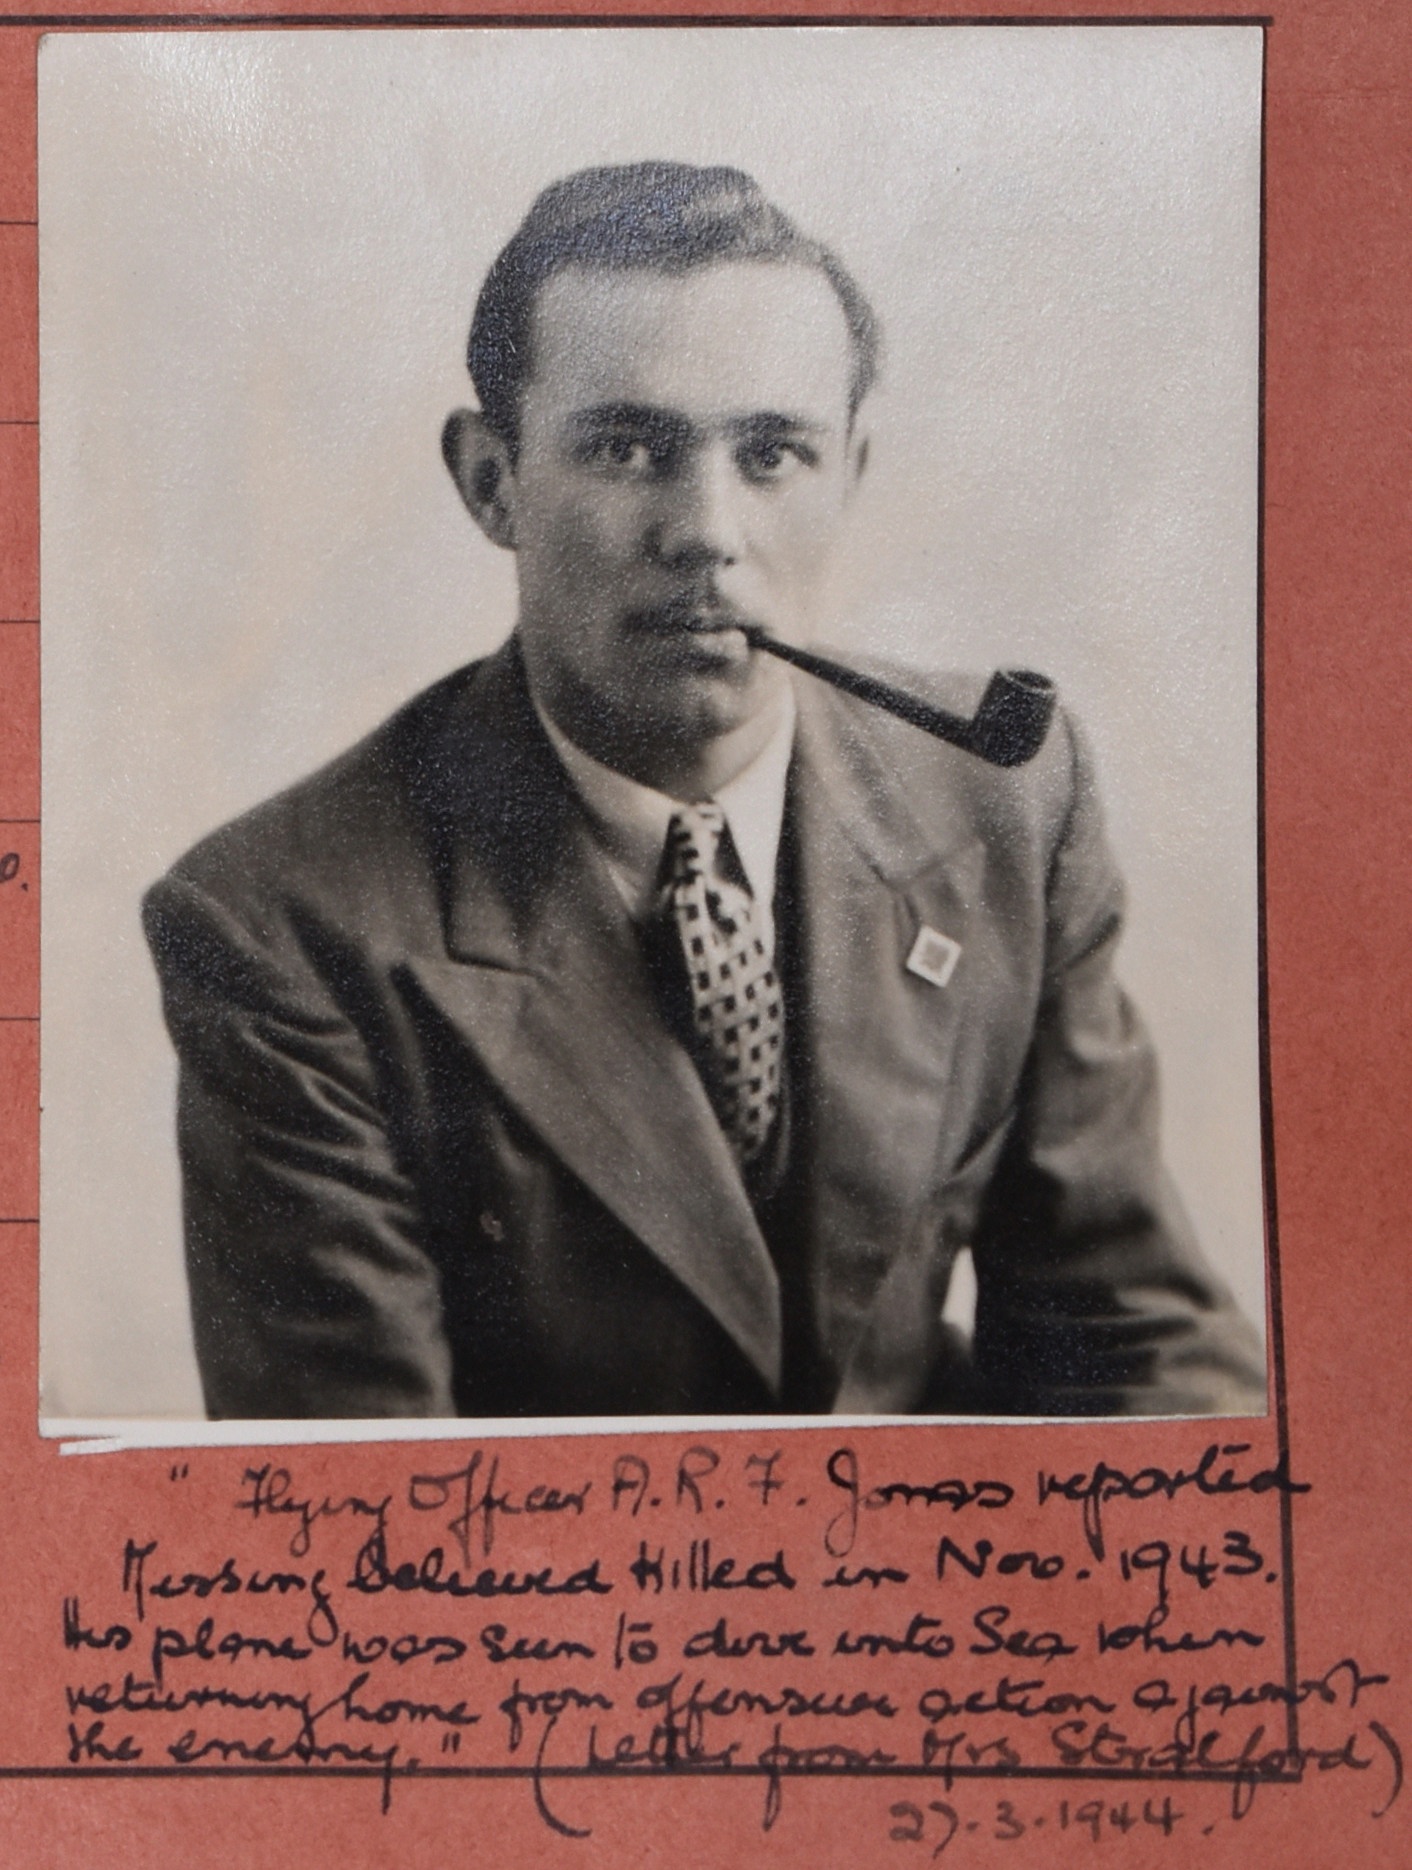 Photograph of Alfred Jonas smoking a pipe with notes regarding death handwritten underneath